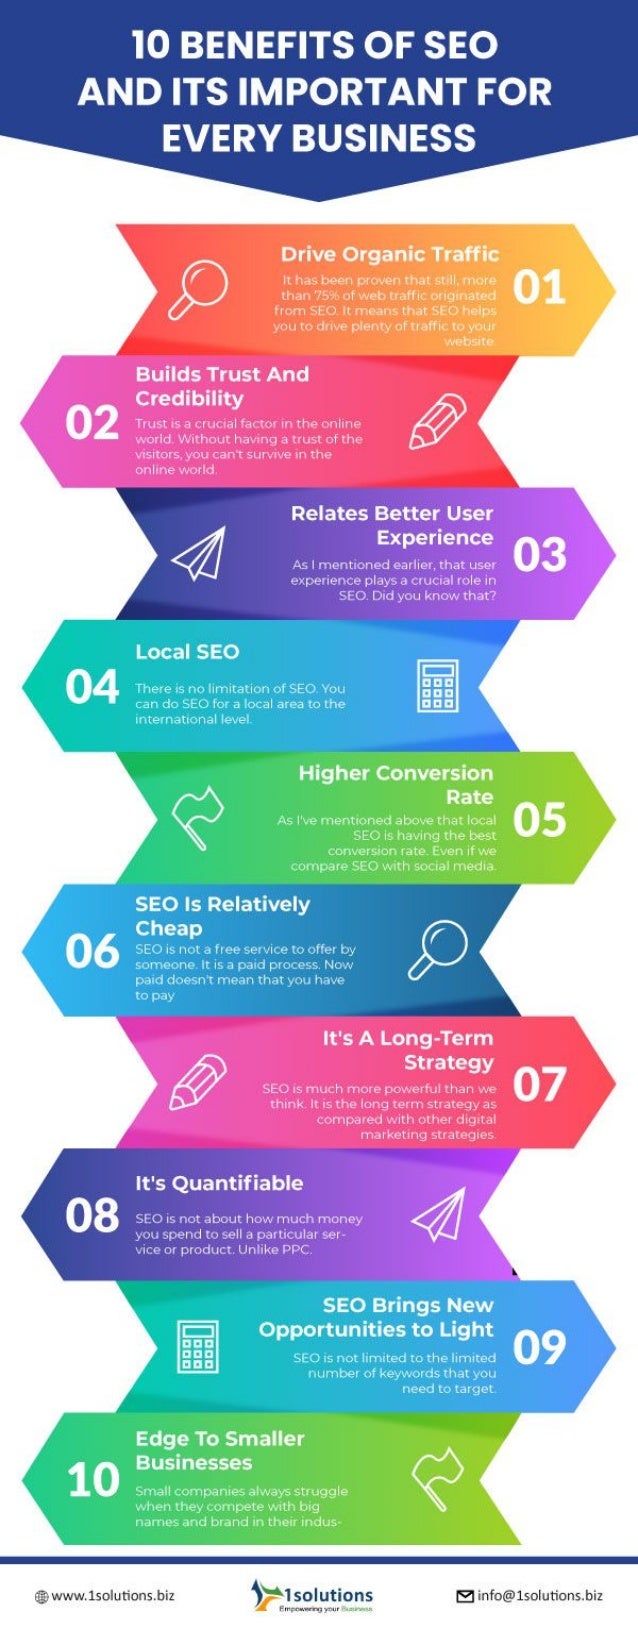 10 Benefits of SEO and Its Important for Every Business